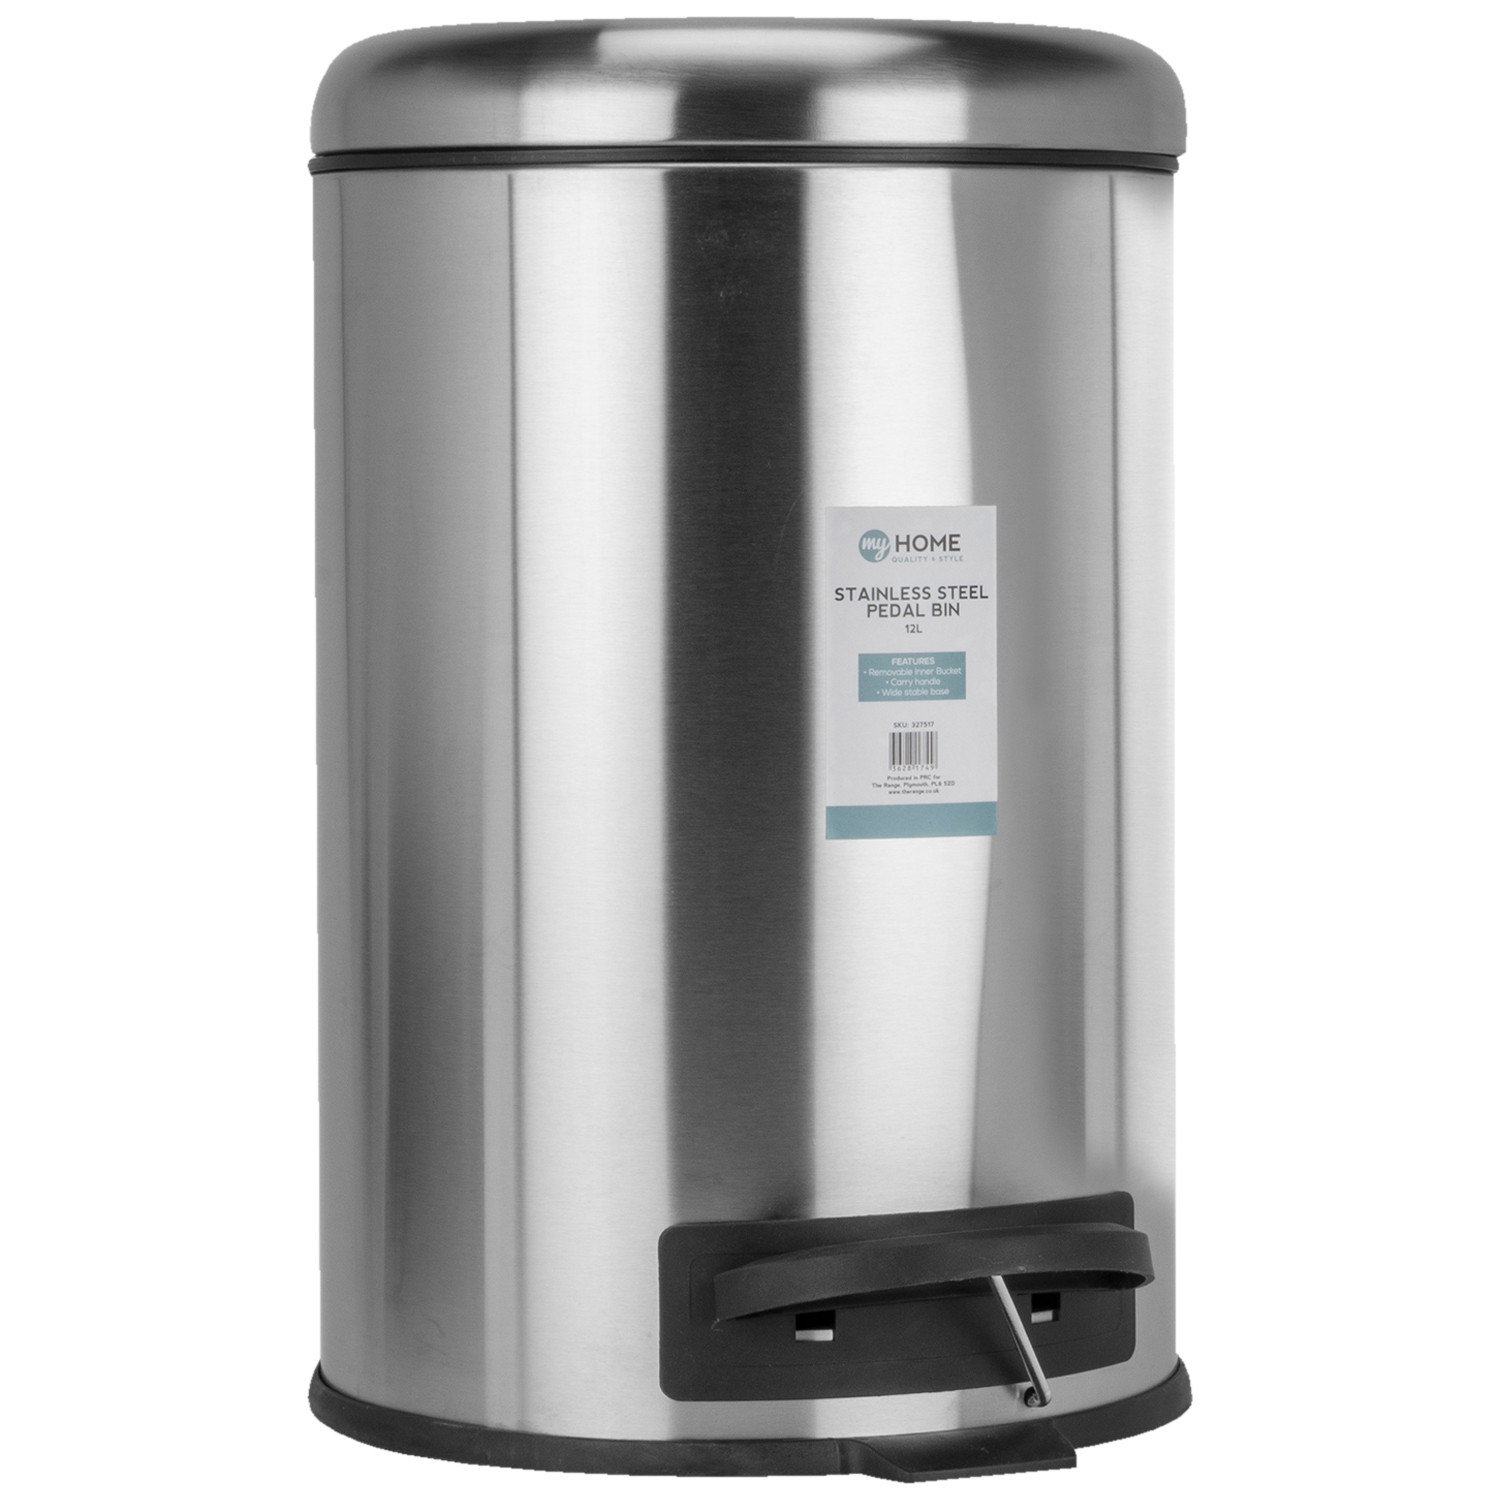 My Home Stainless Steel Pedal Bin 12L Image